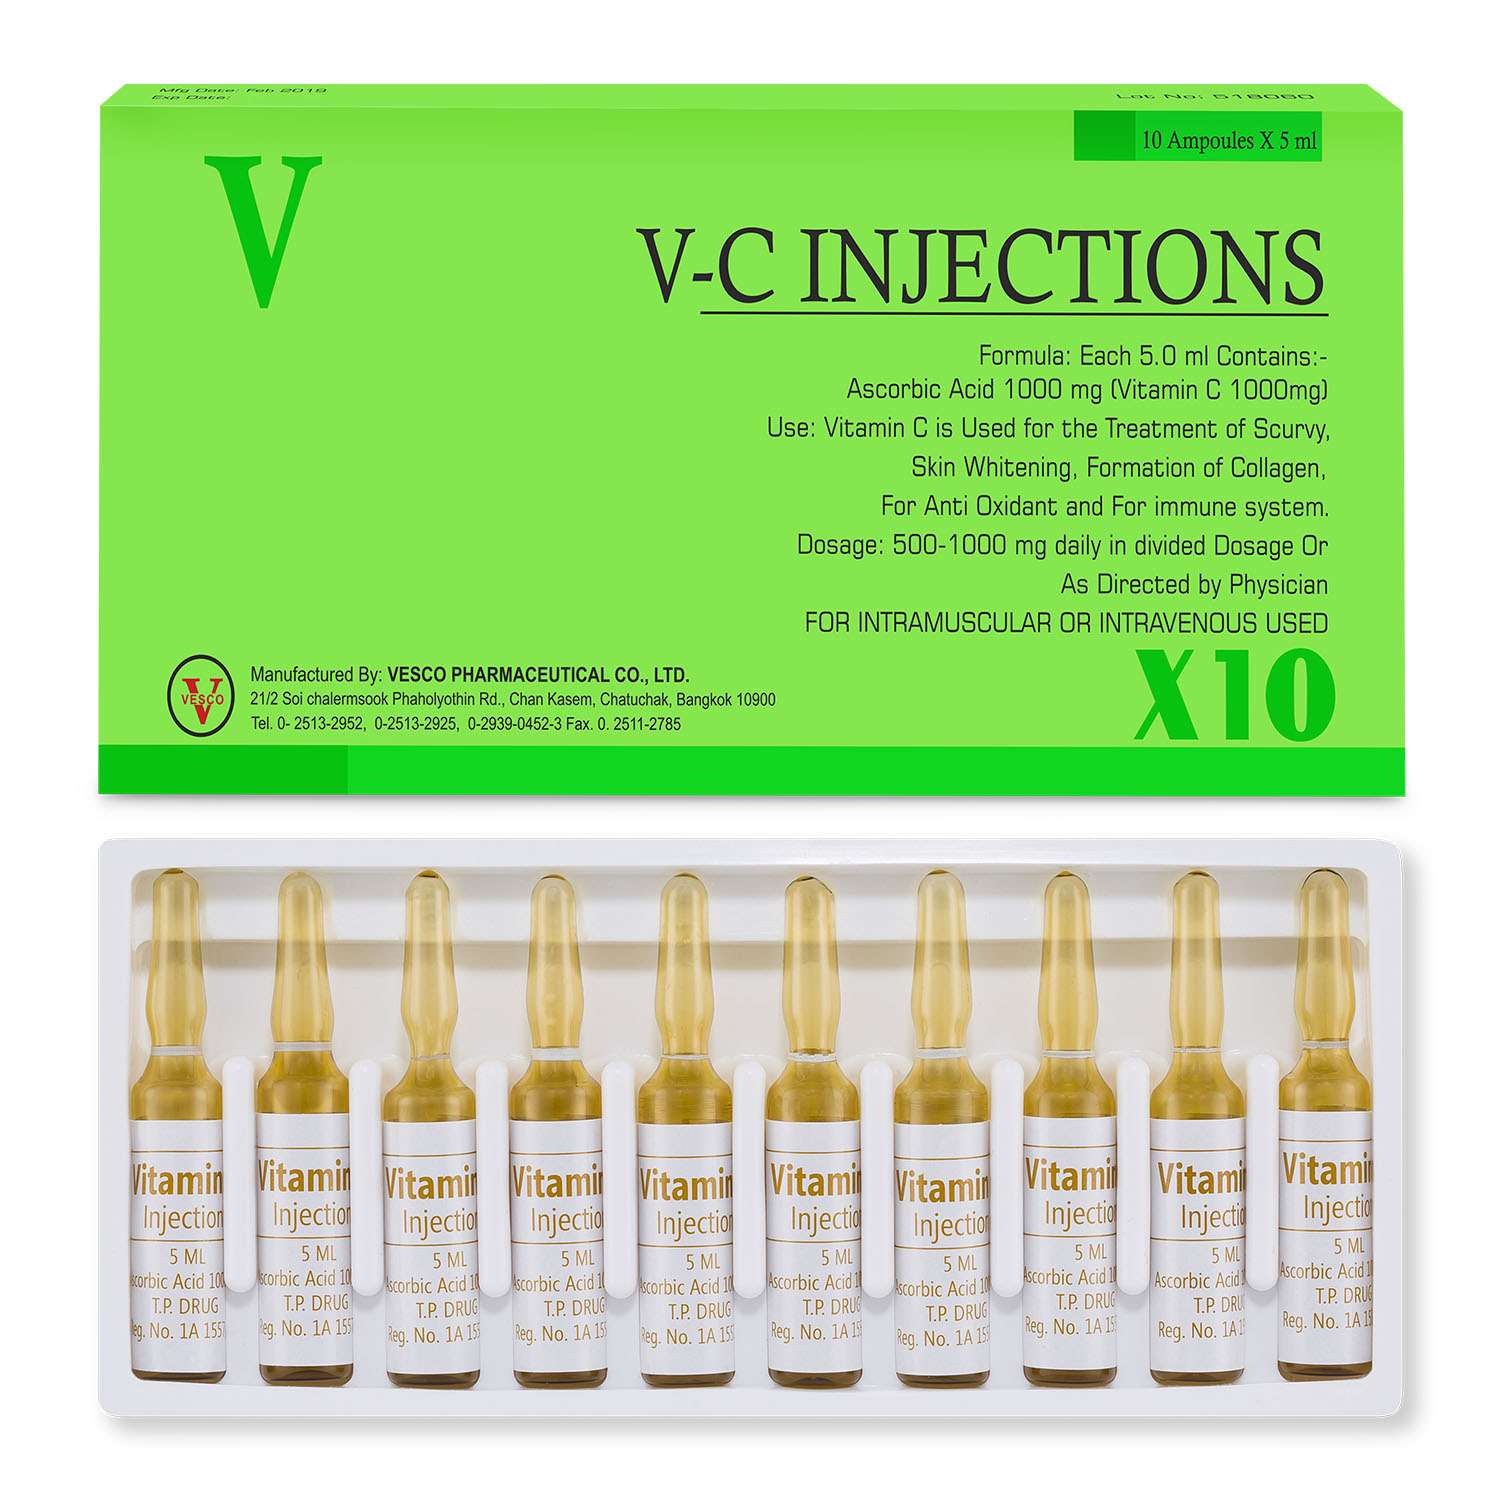 VC 500mg skin whitening injection | Healthcare Beauty